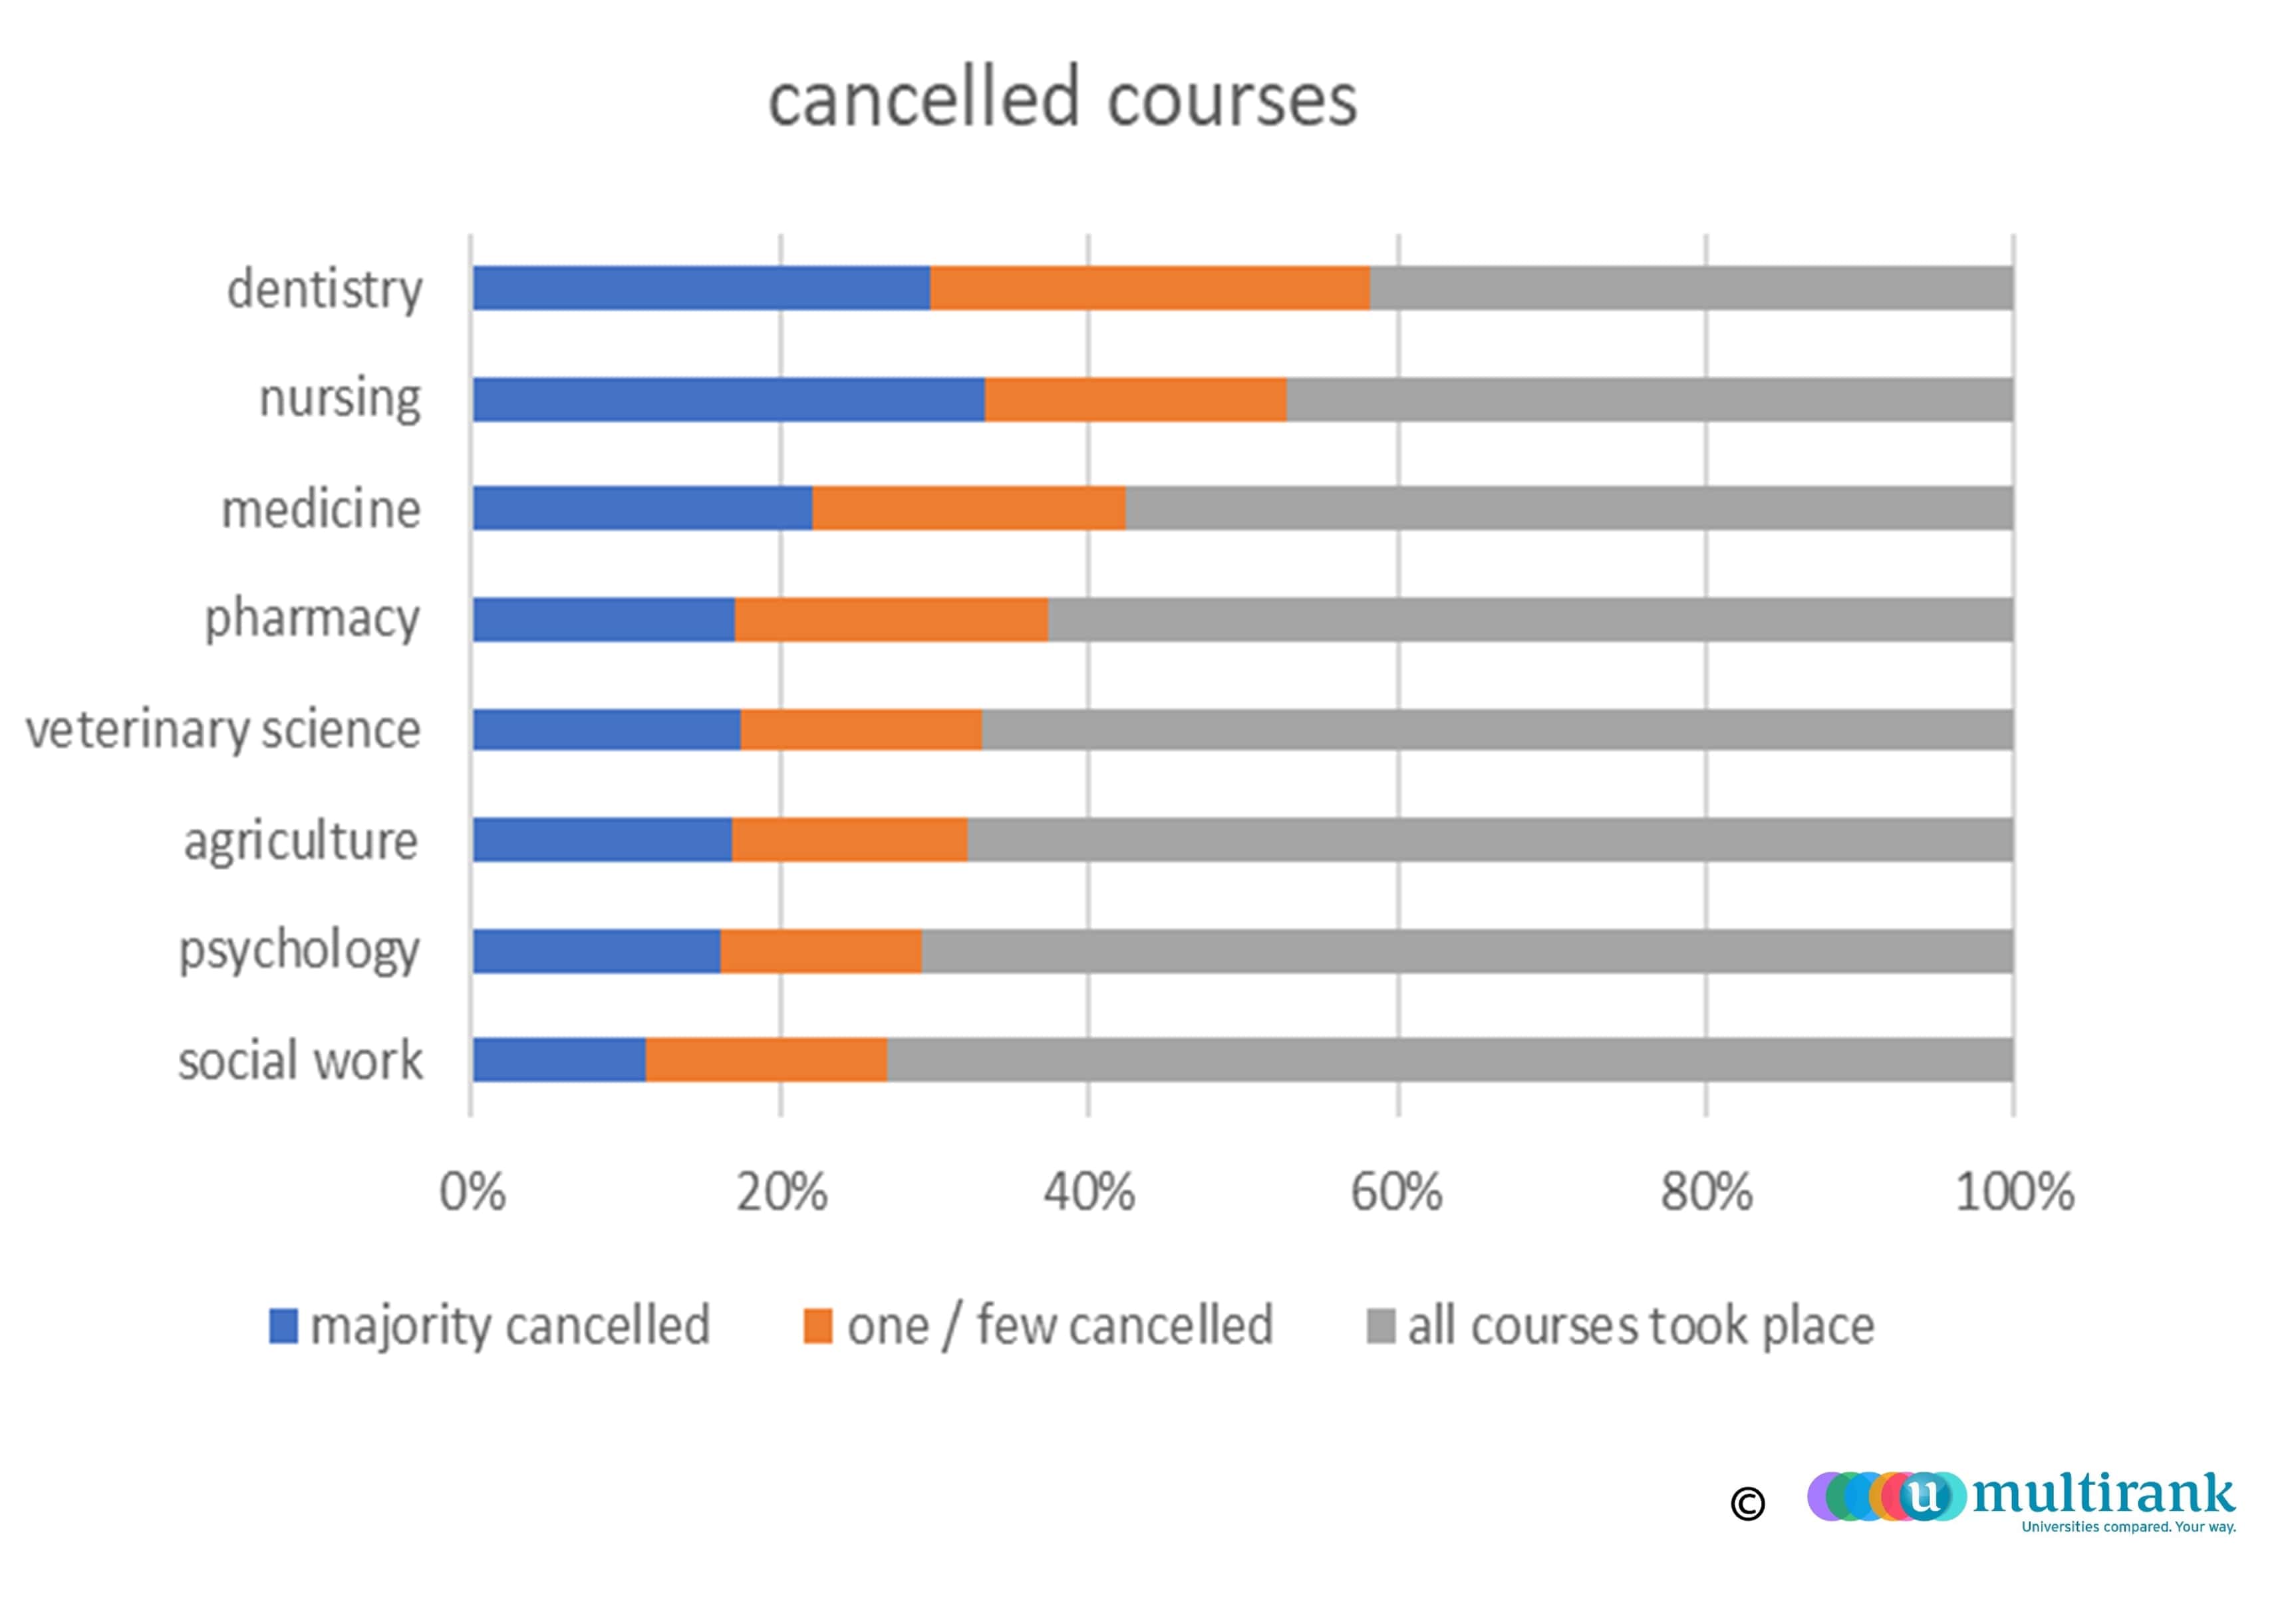 Cancelled courses during the Covid-19 pandemic